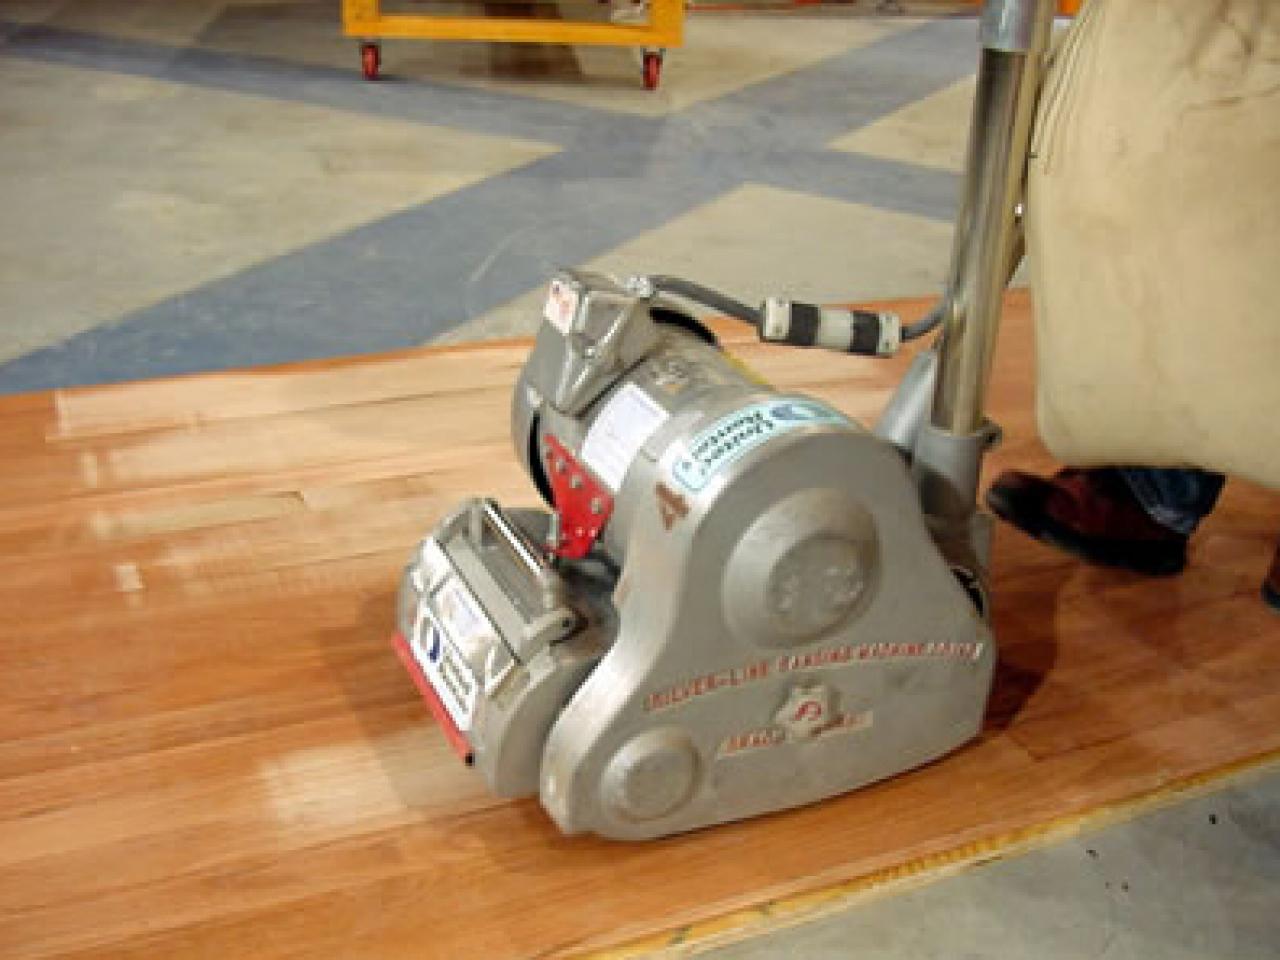 Drill Brushes and Floor Sander: How to